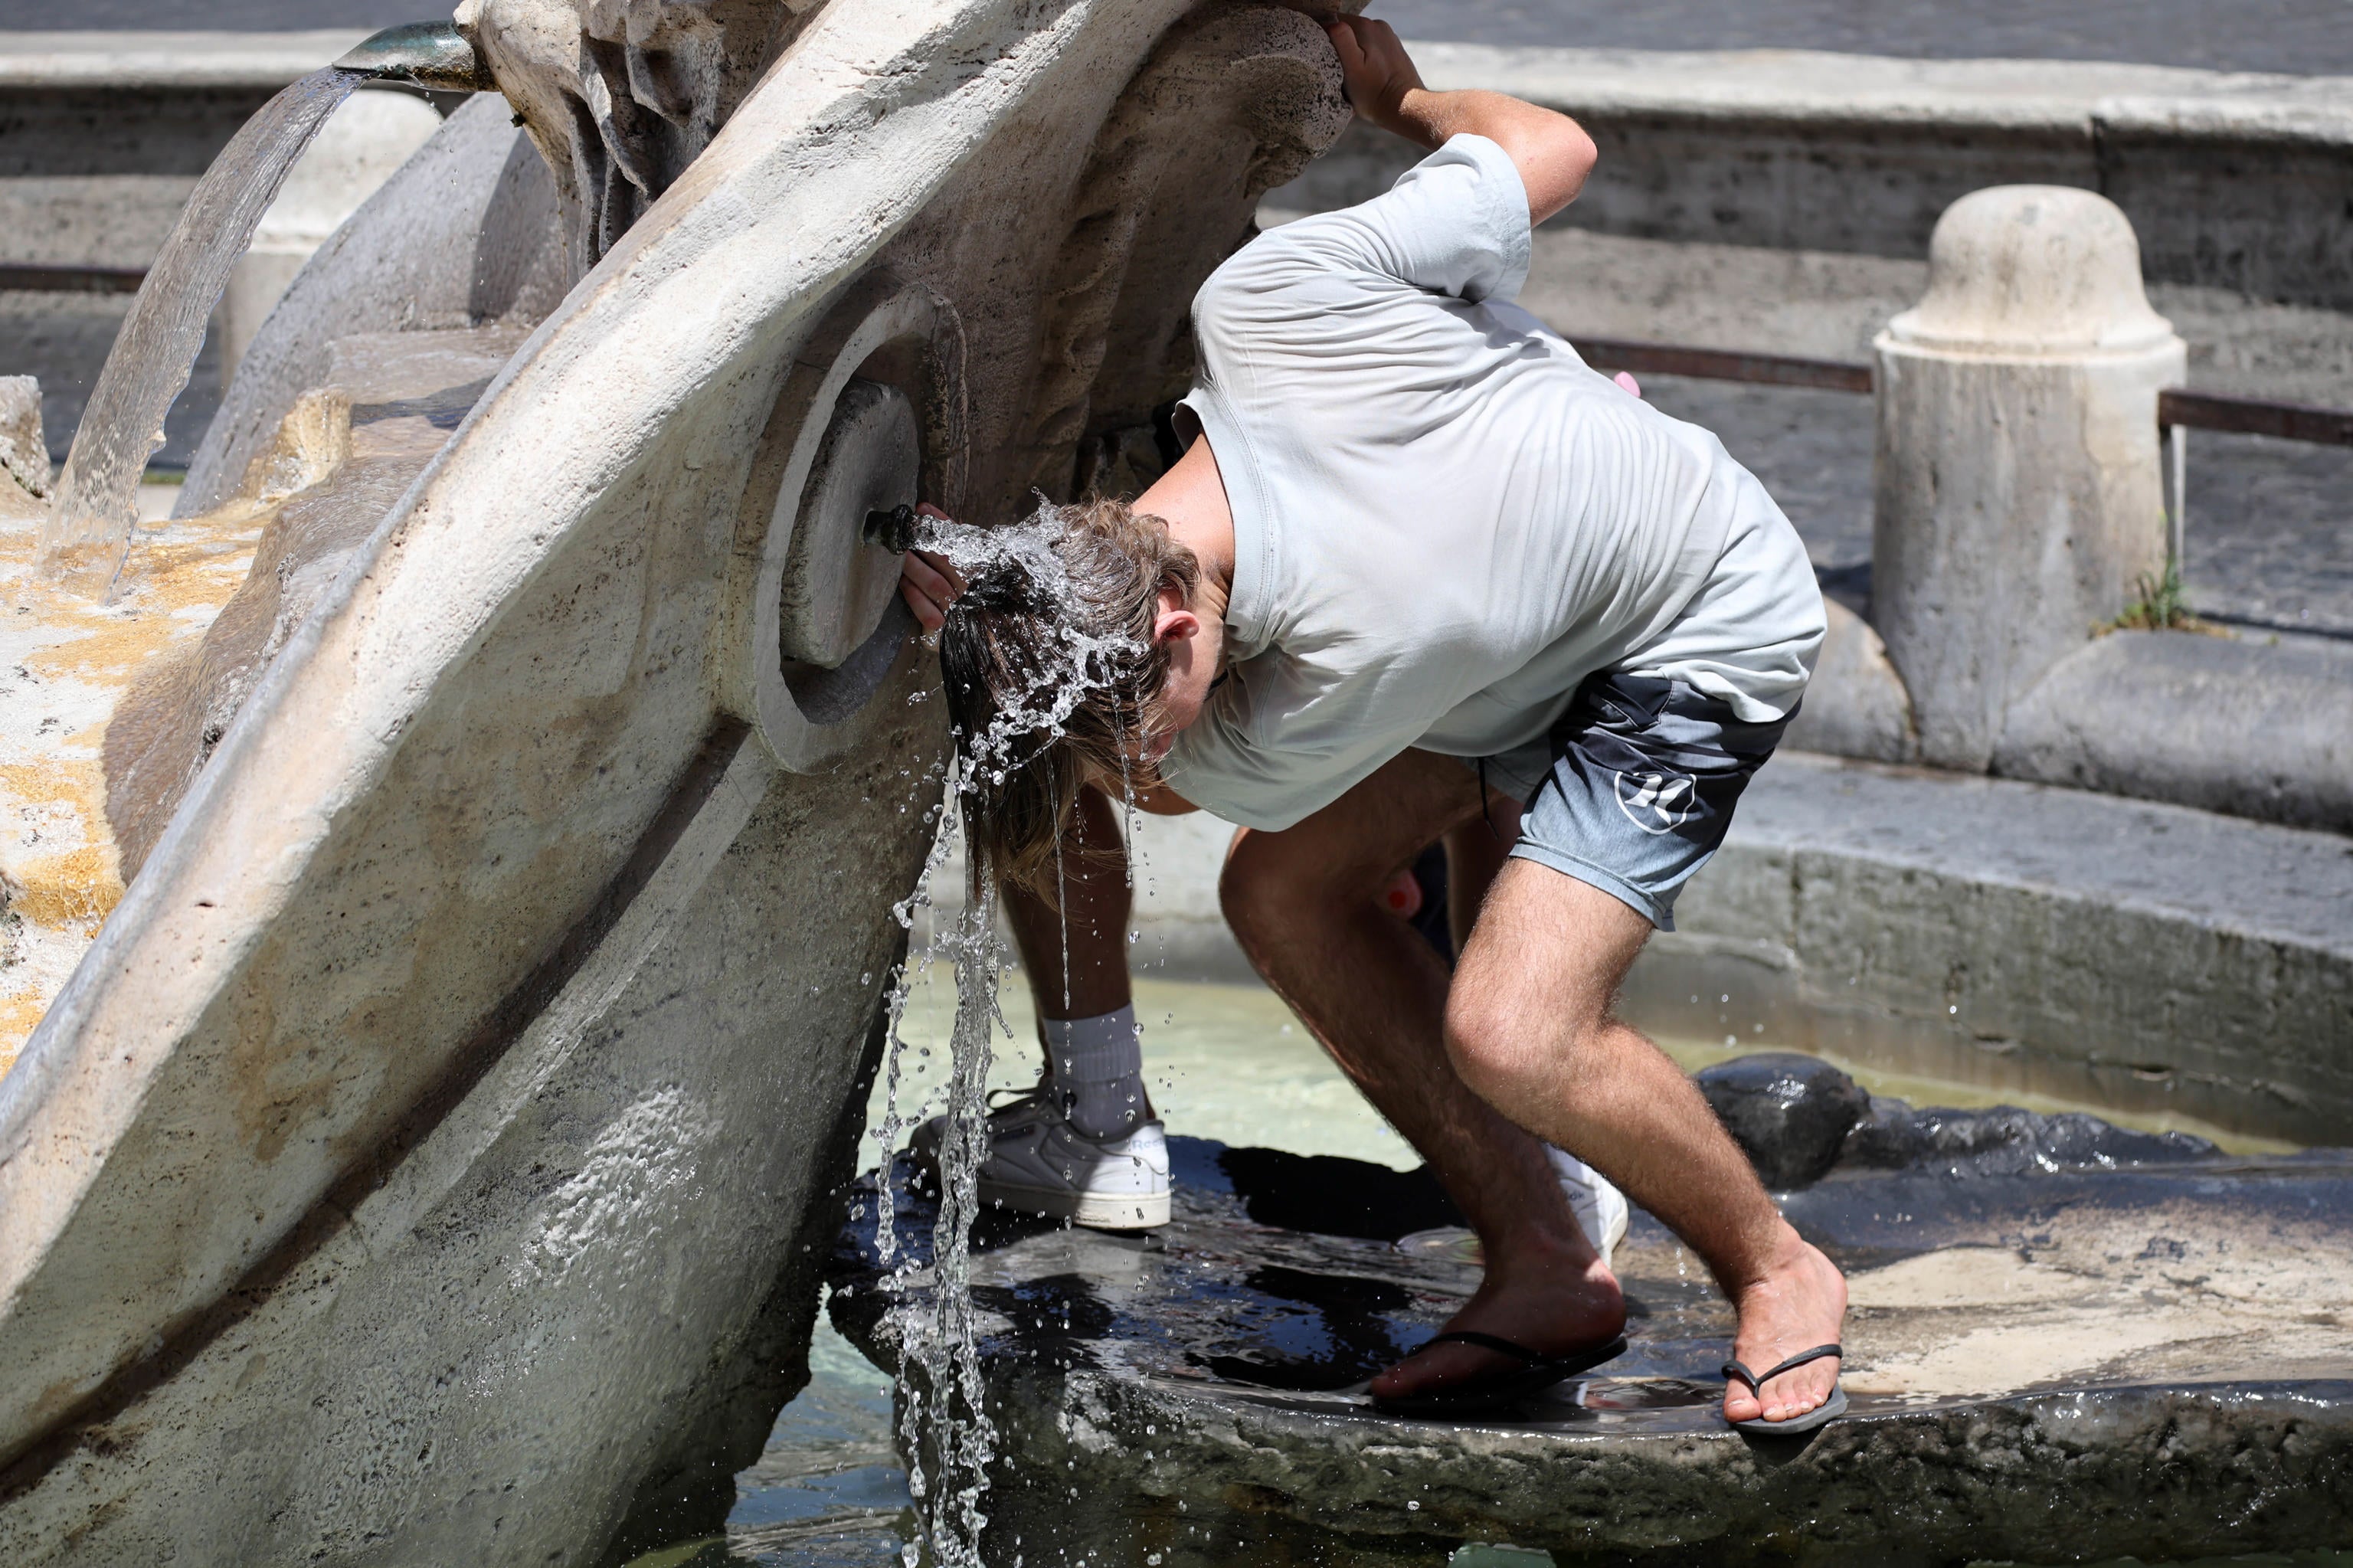 The unrelenting heatwave has shown no sign of abating on Tuesday, with Italy bracing for its highest-ever temperature